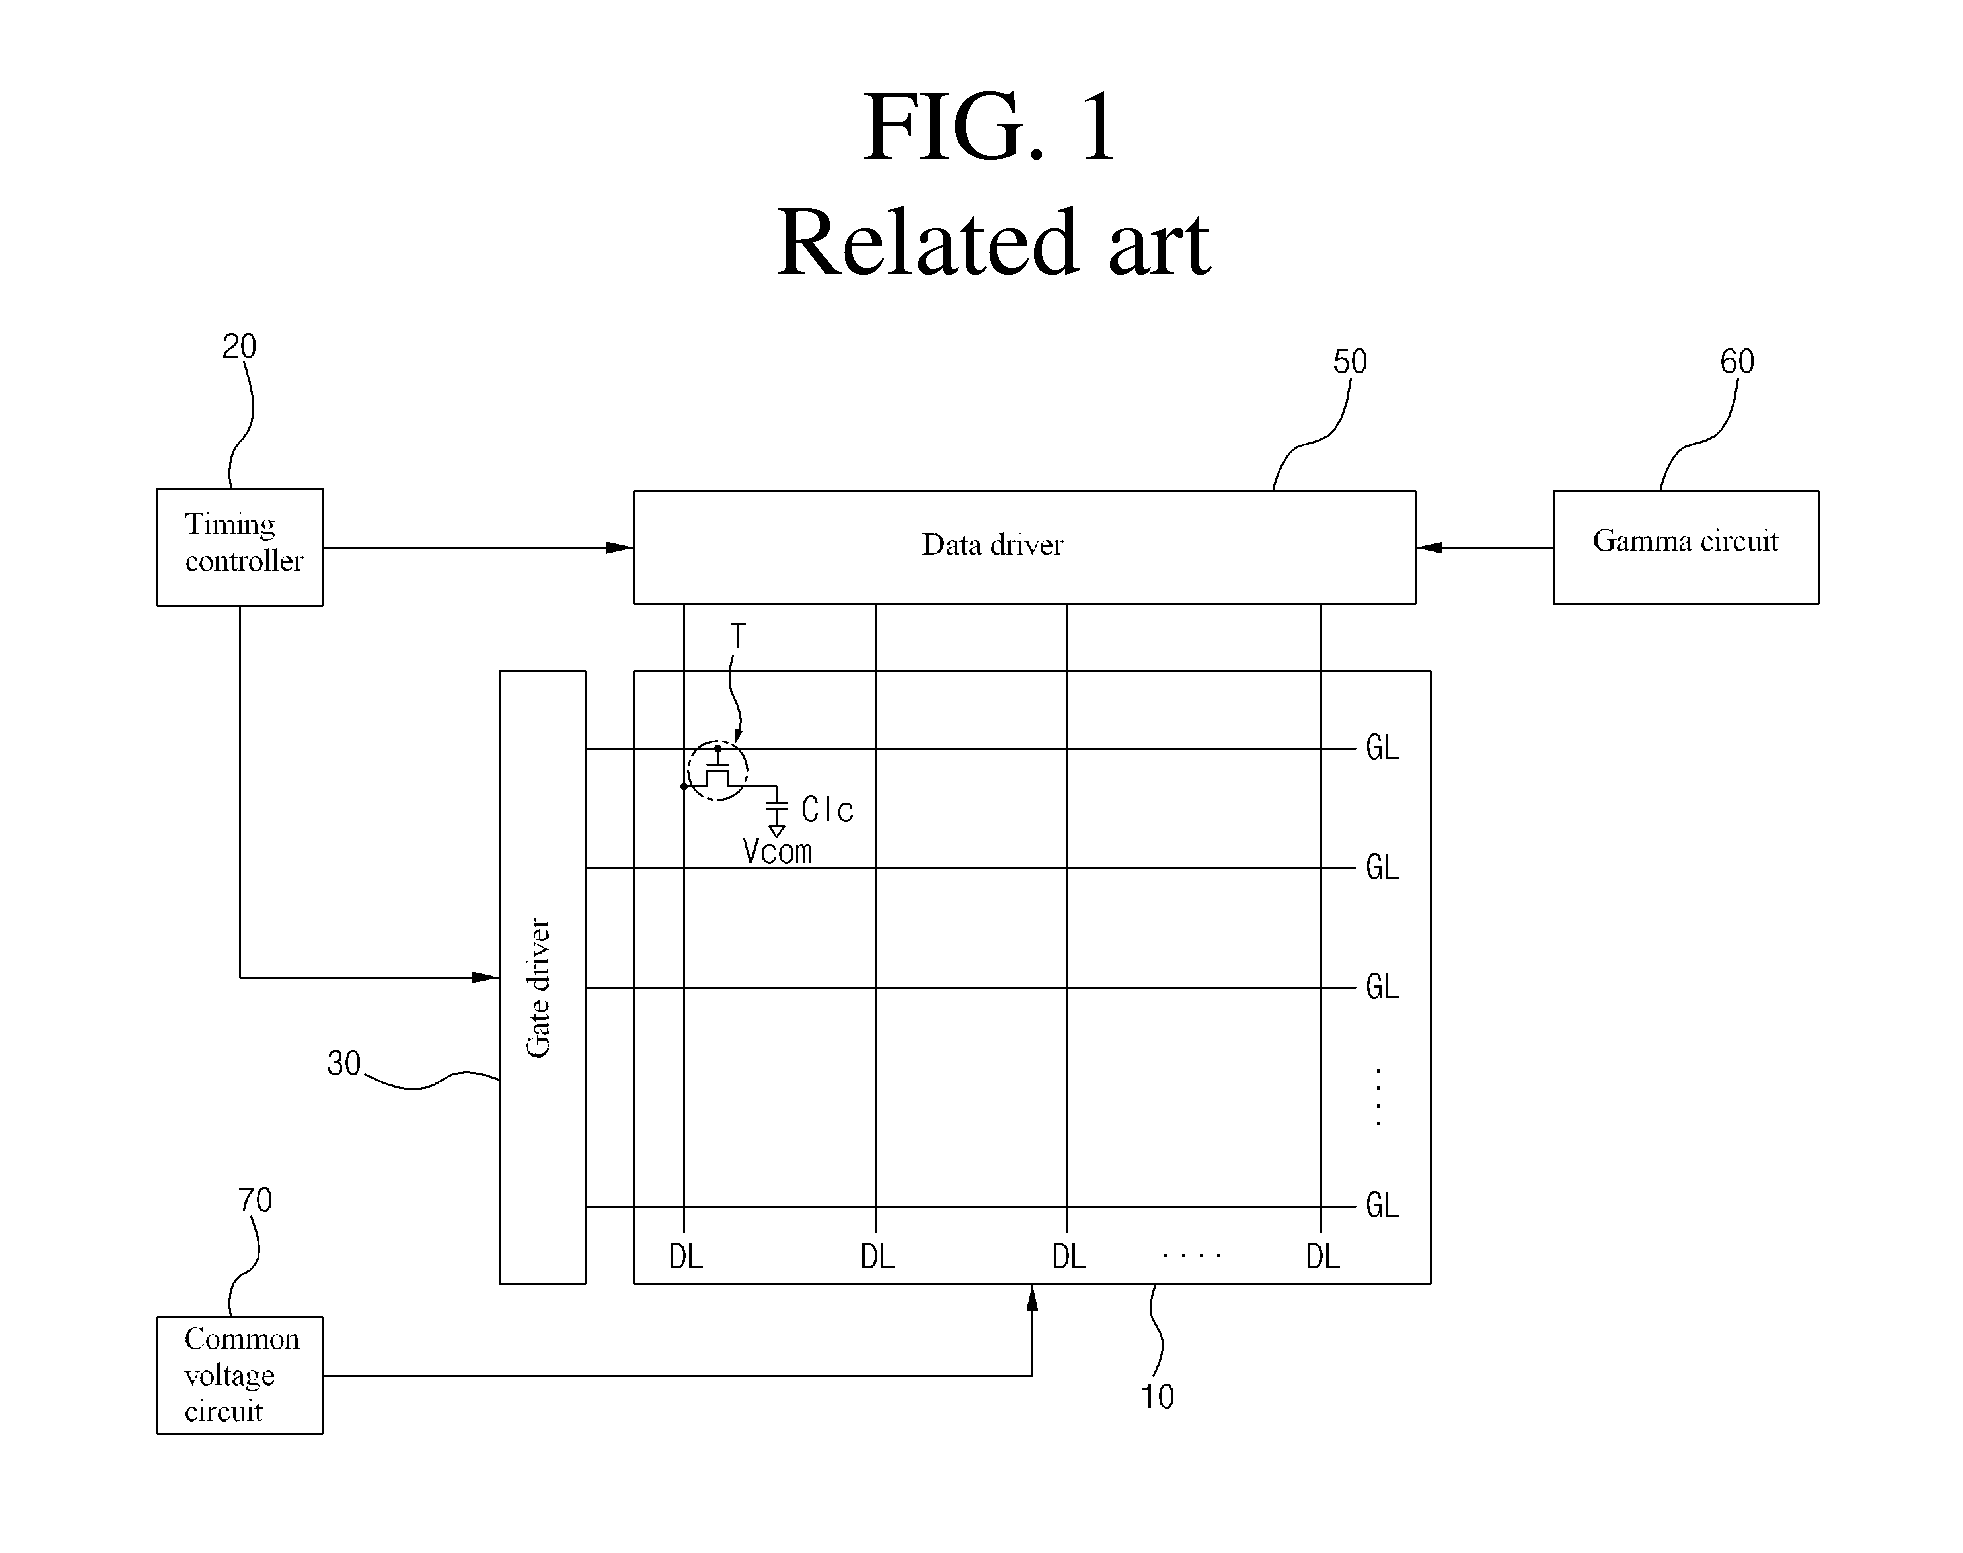 Compensation circuit for common voltage according to gate voltage